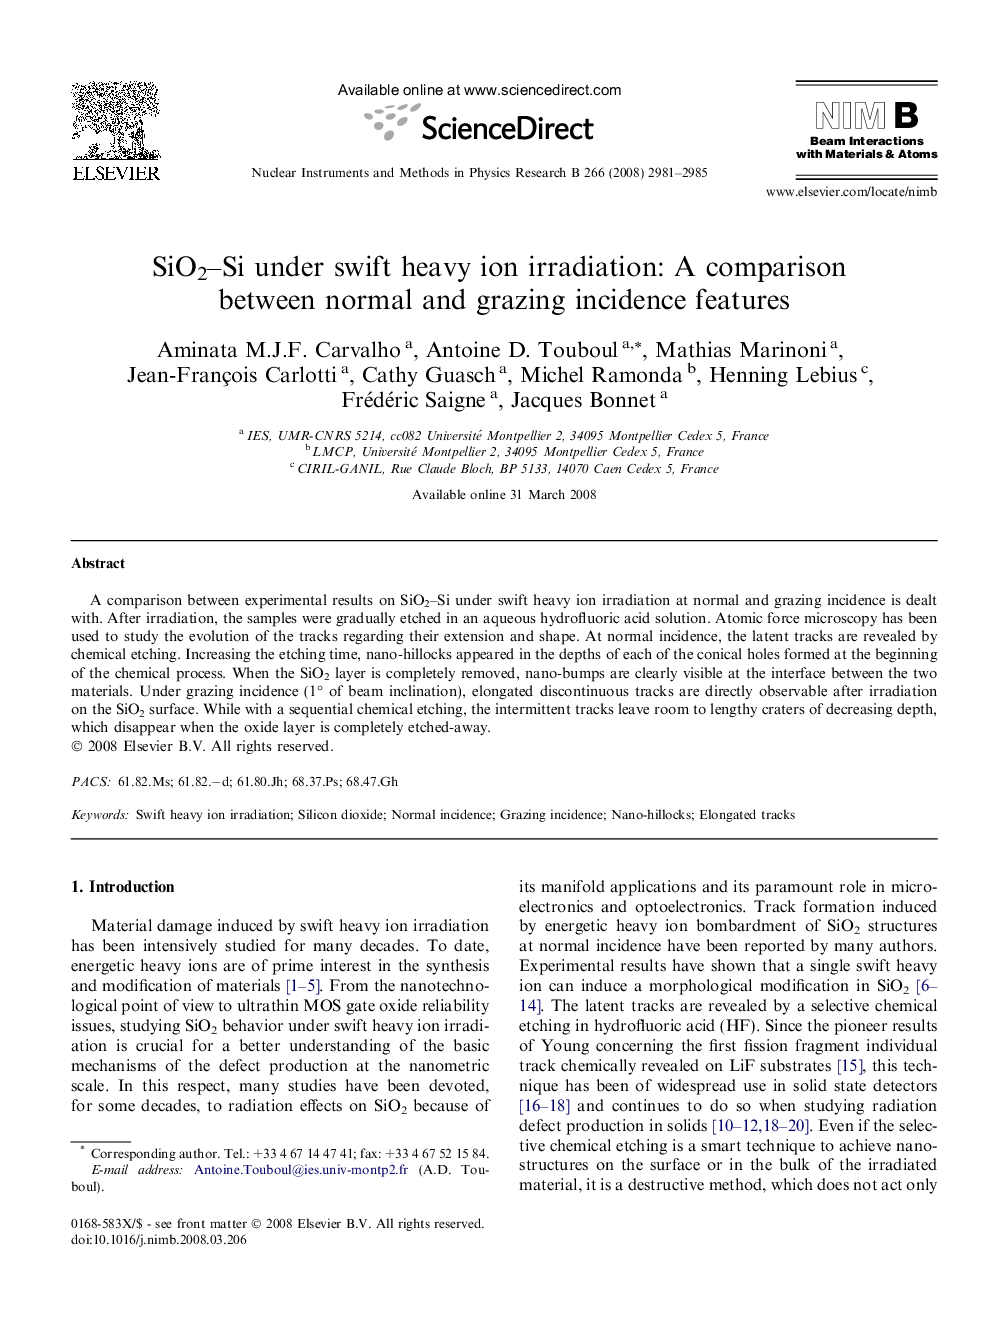 SiO2-Si under swift heavy ion irradiation: A comparison between normal and grazing incidence features